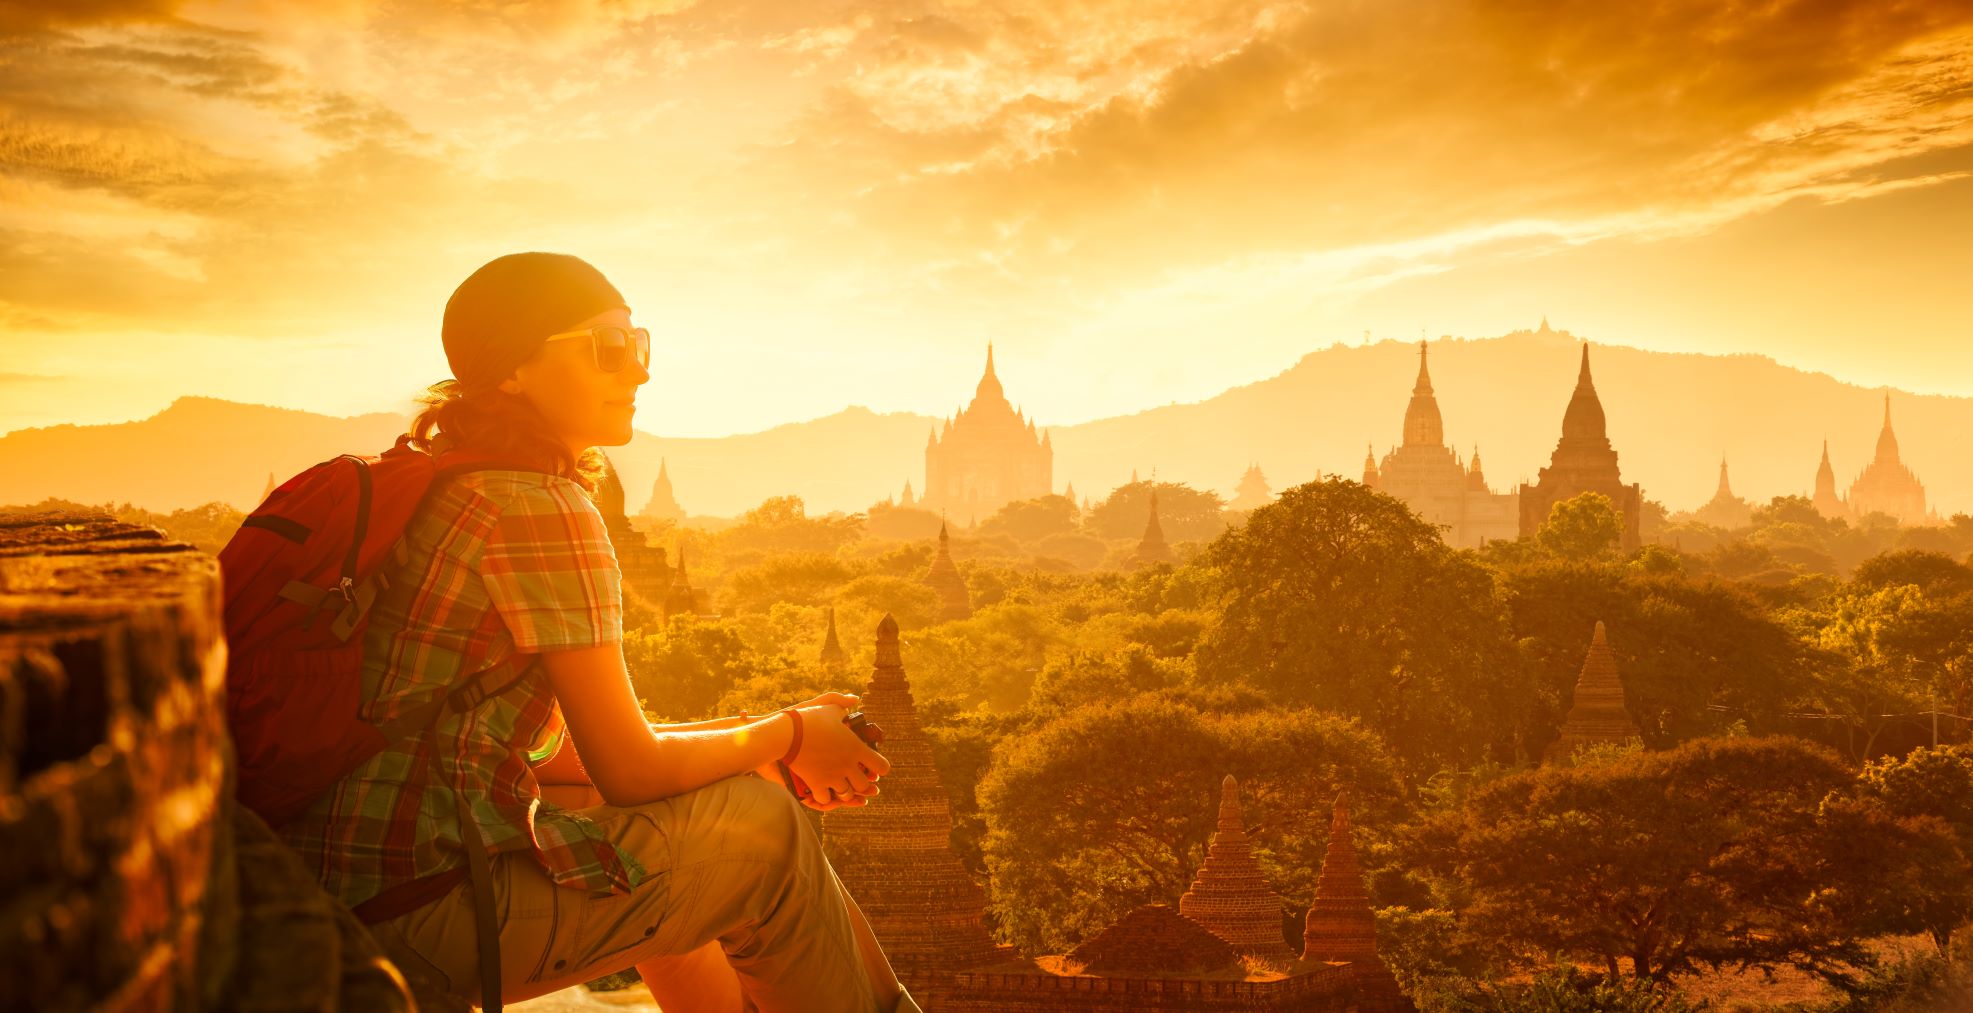 Travel Movies that will inspire you to travel around the world